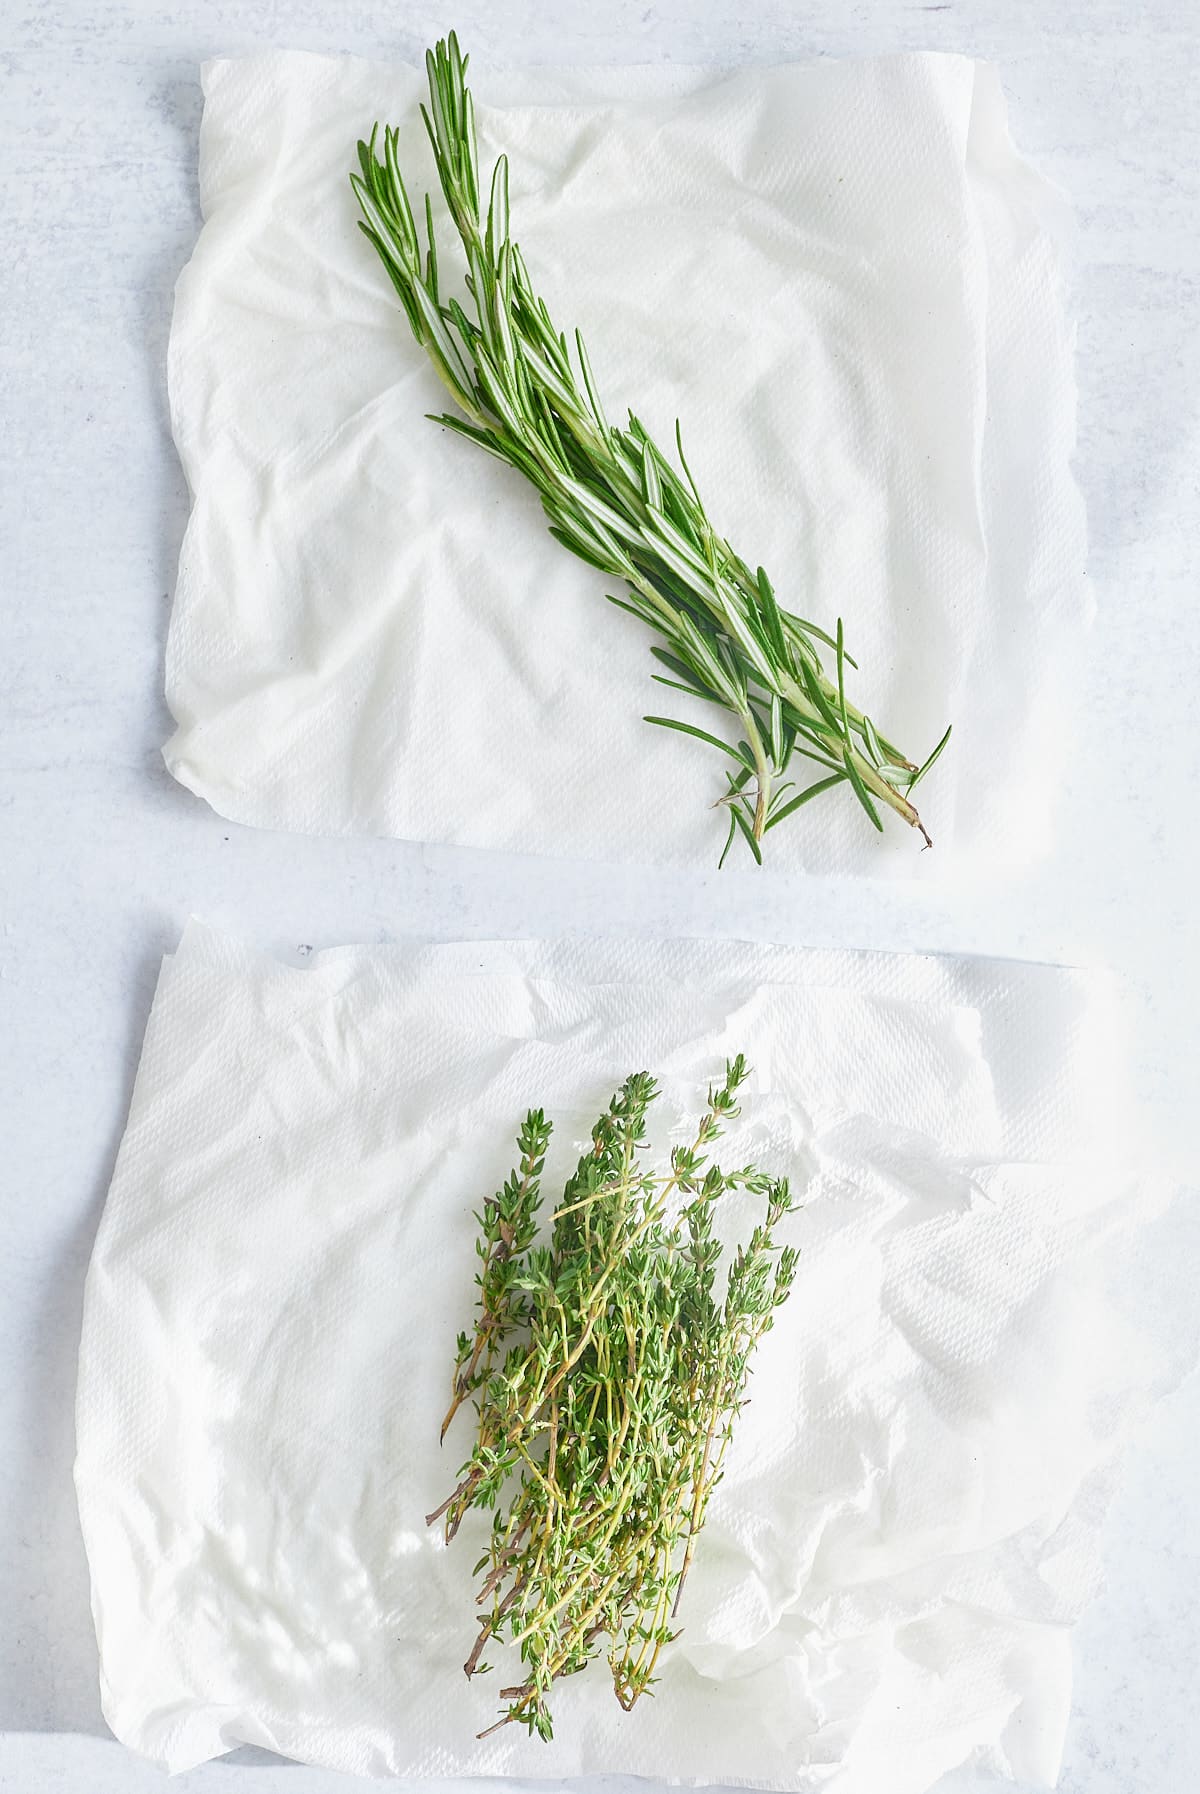 rosemary and thyme on damp paper towel